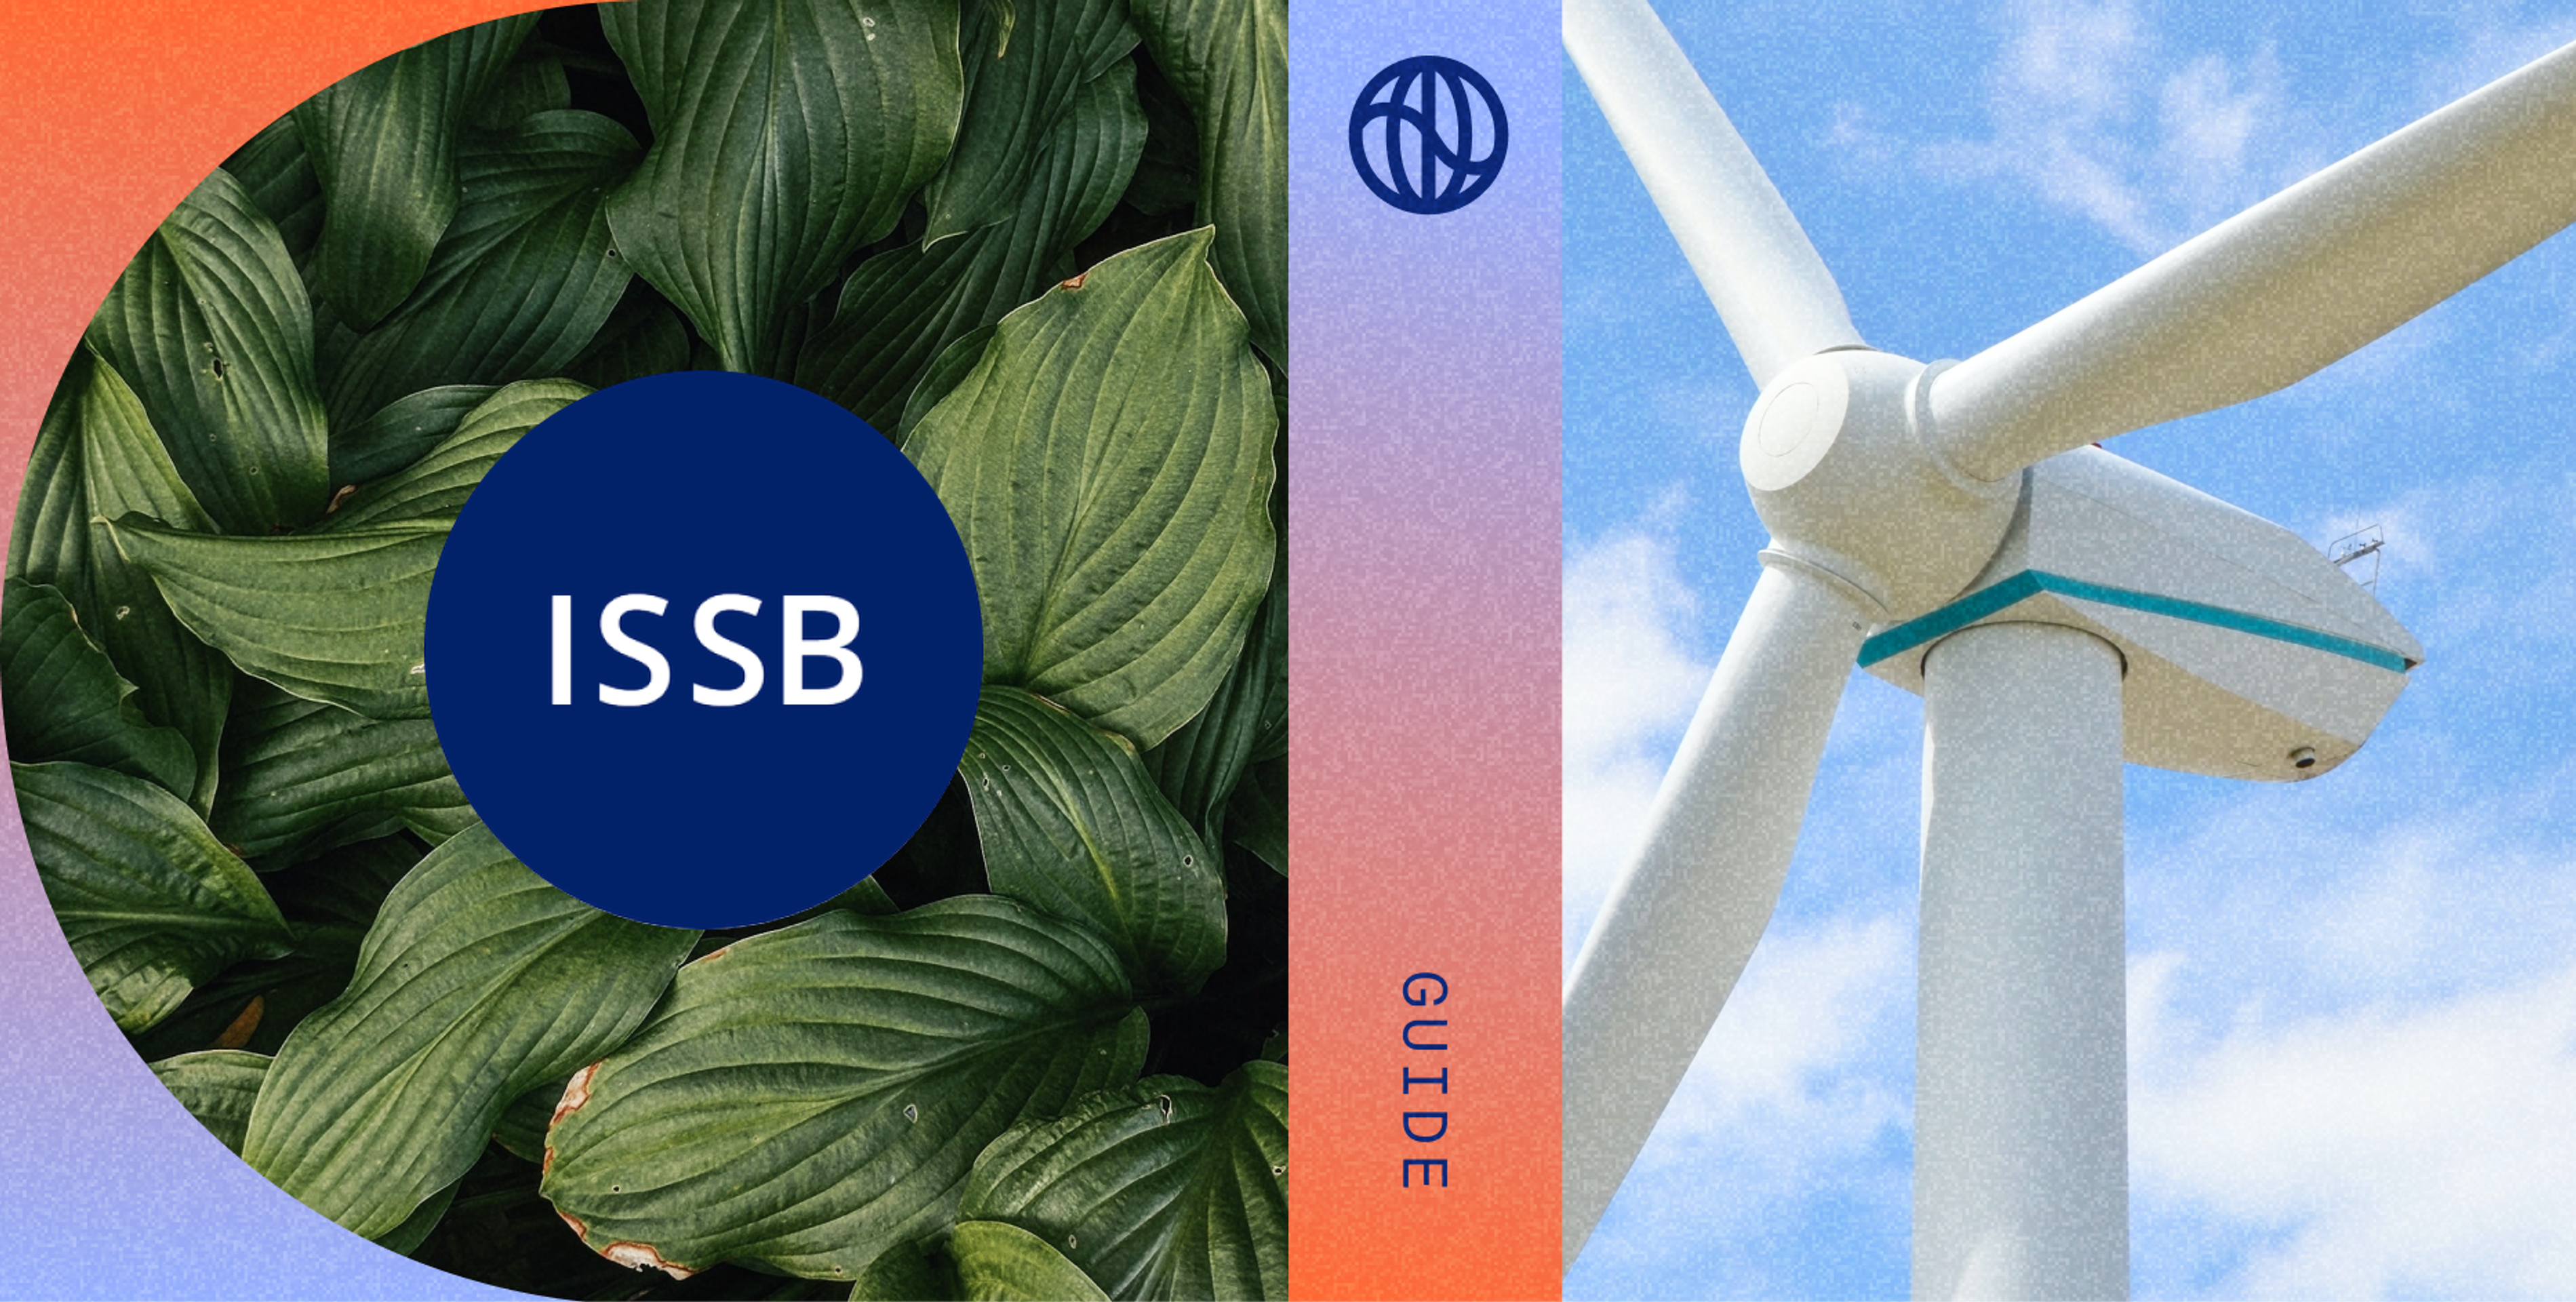 green leaves and windmill. Watershed logo, ISSB logo, Guide